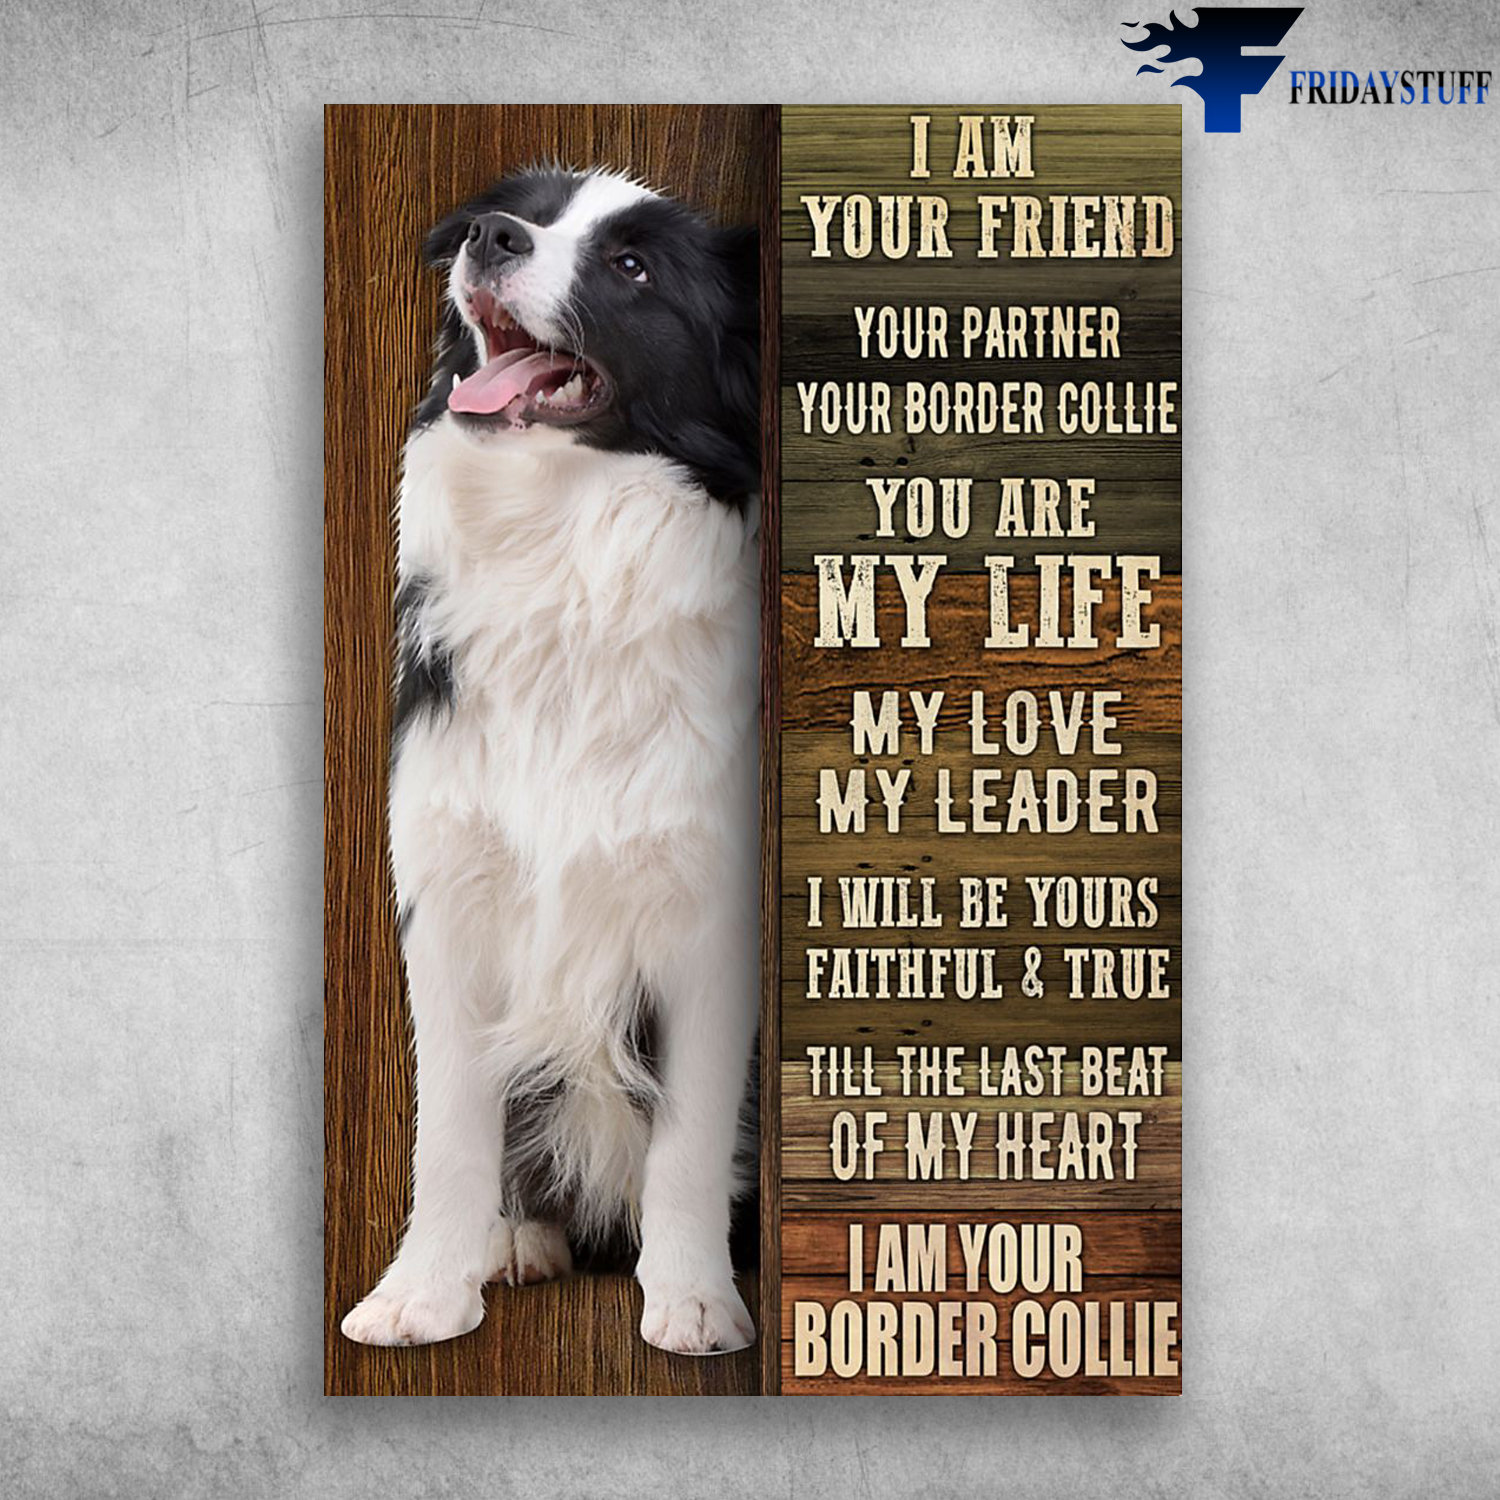 Border Collie - I Am Your Friend, Your Partner, Your Border Collie, You Are My Life, My Love, My Leade, I Will Be Yours Faithful & True Till The Last Beat Of My Heart, I Am Your Border Collie